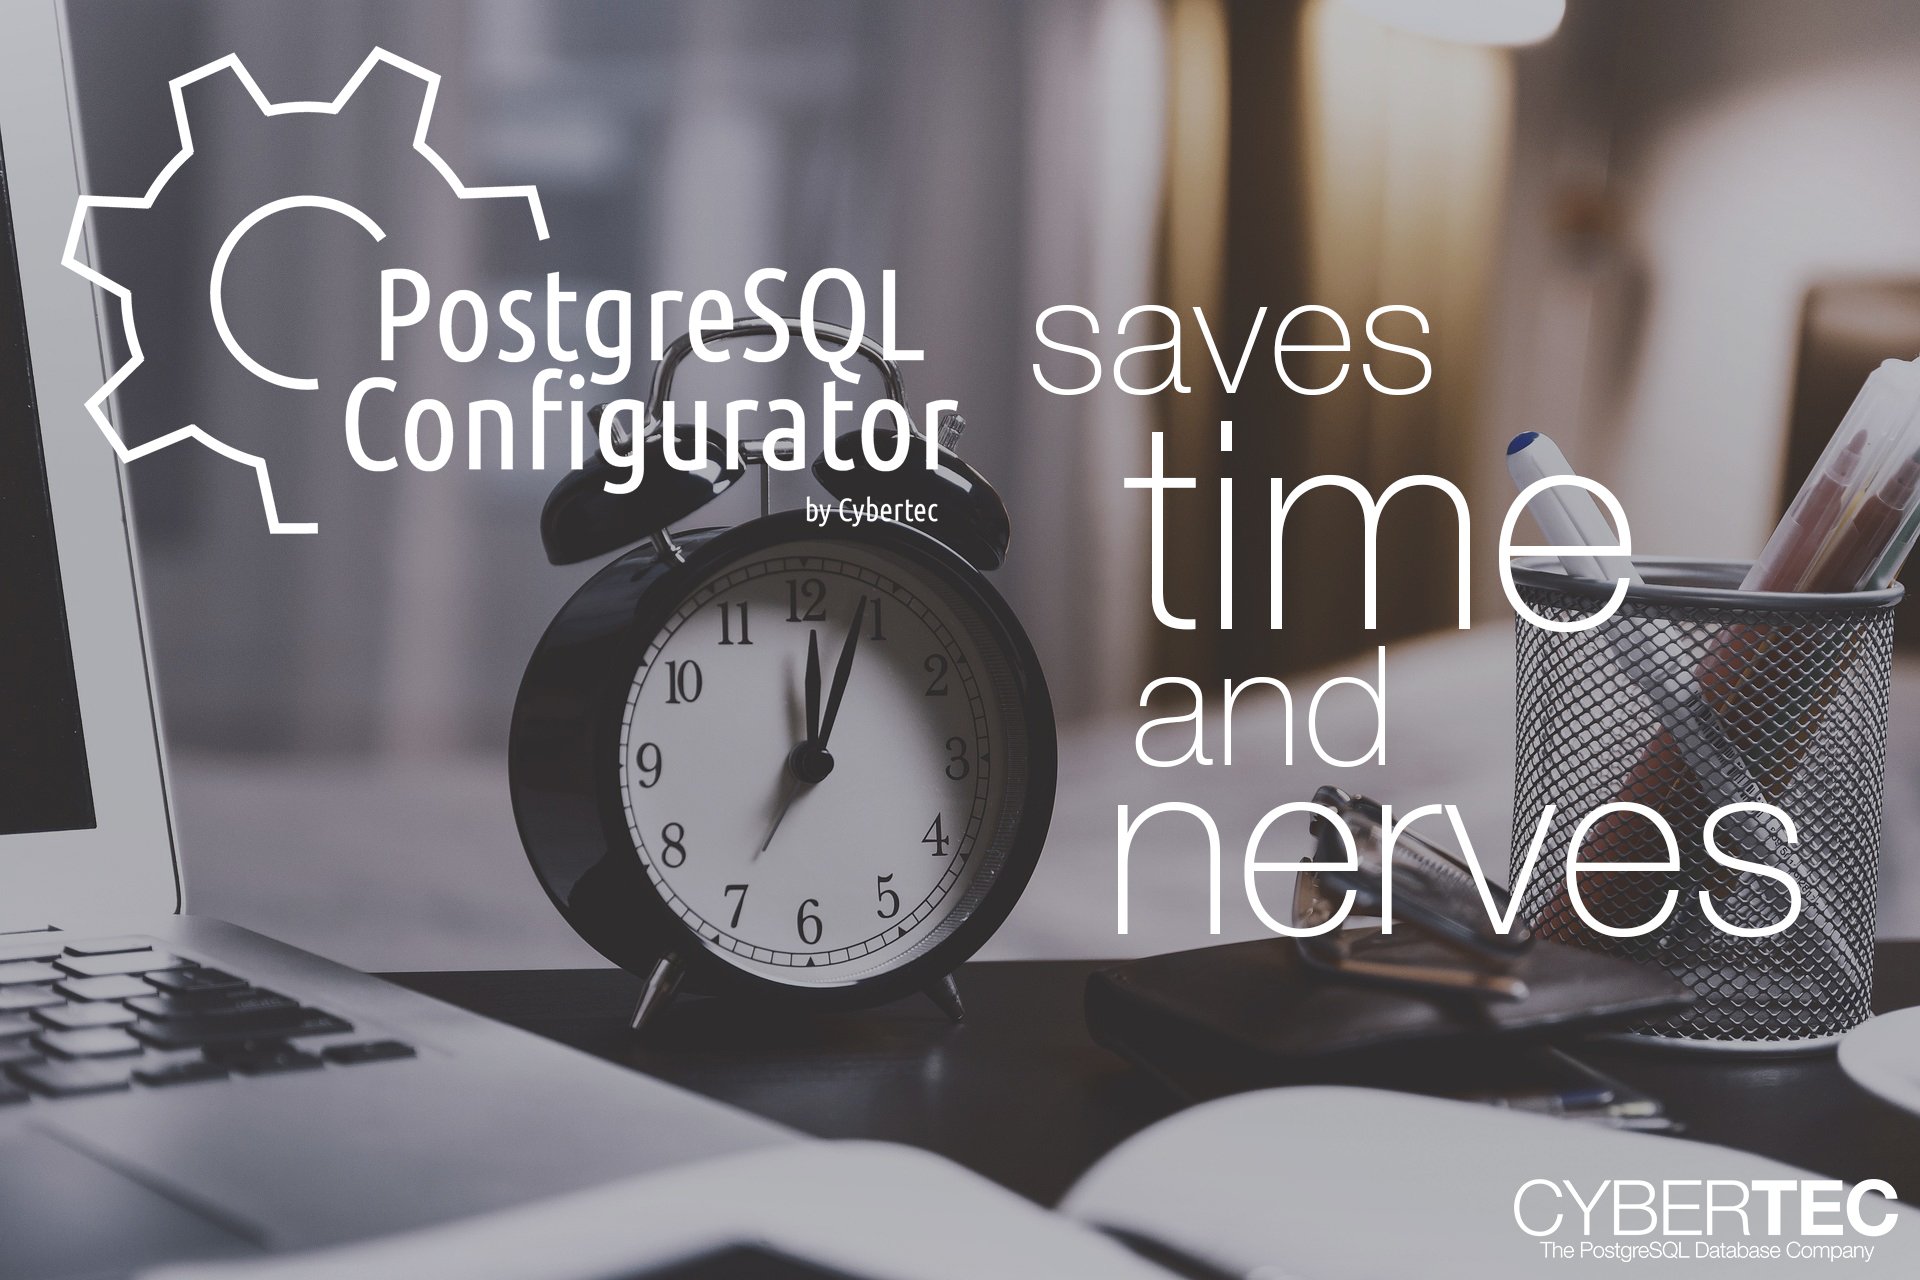 PGConfigurator: configure PostgreSQL quickly and easily, save time and your nerves